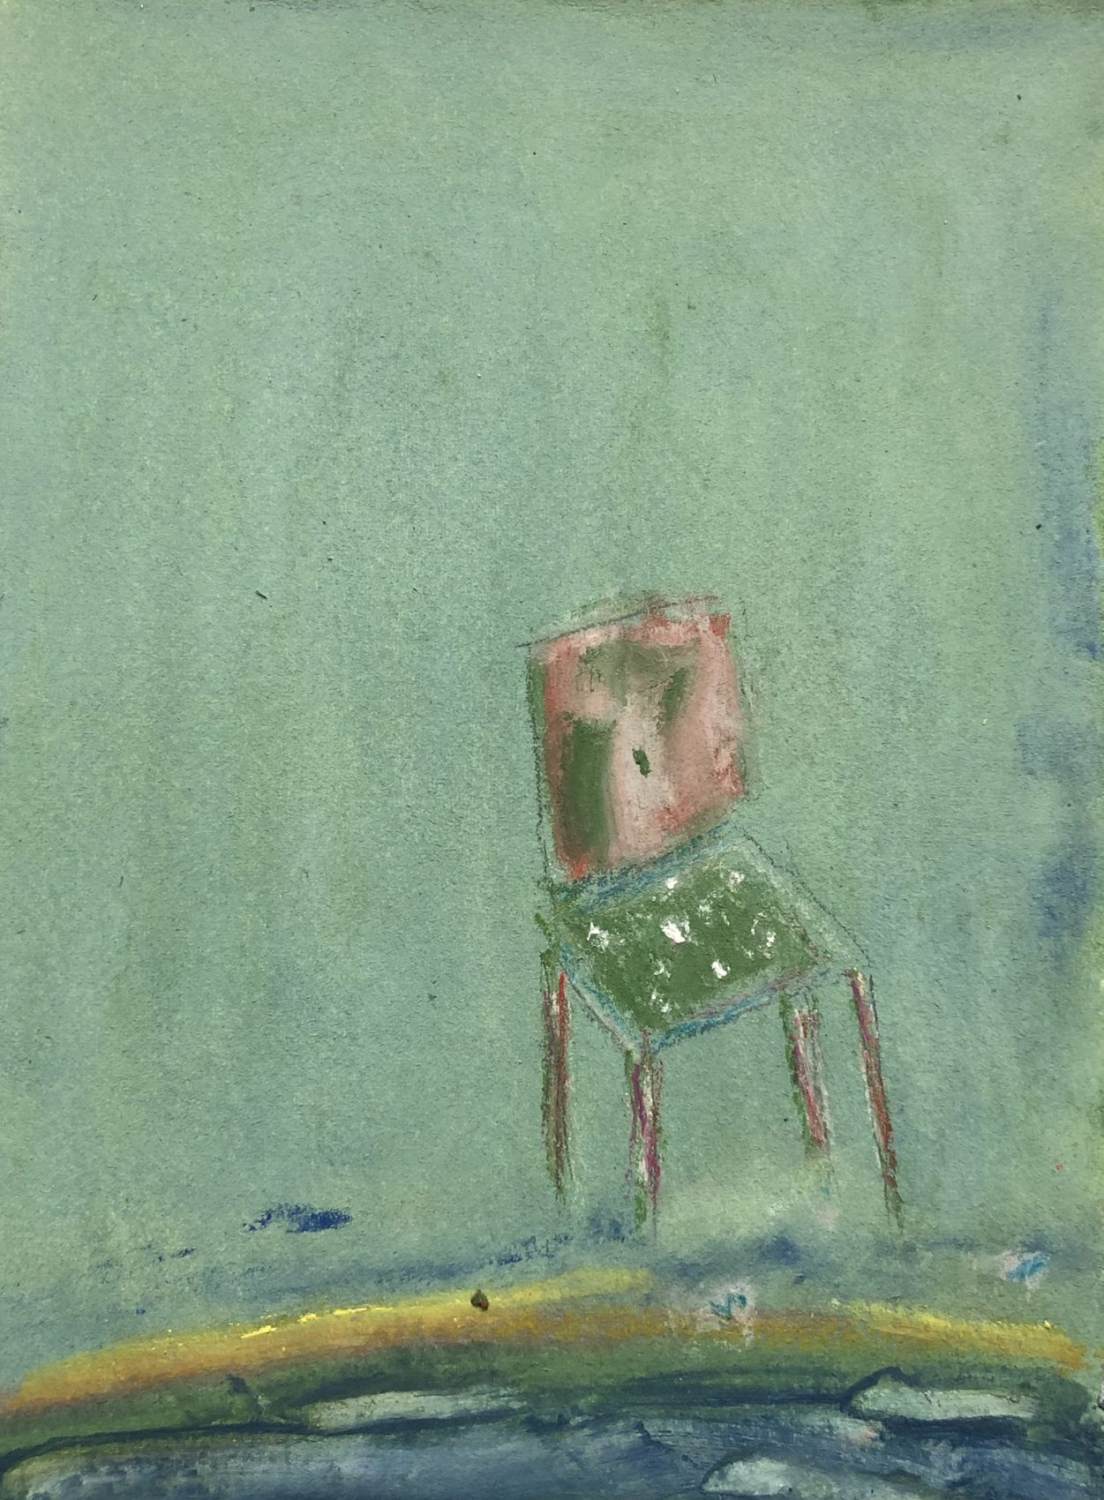 lorraine-weidner-repose-11-contemporary-still-life-abstract-realism-green-chair-online-gallery